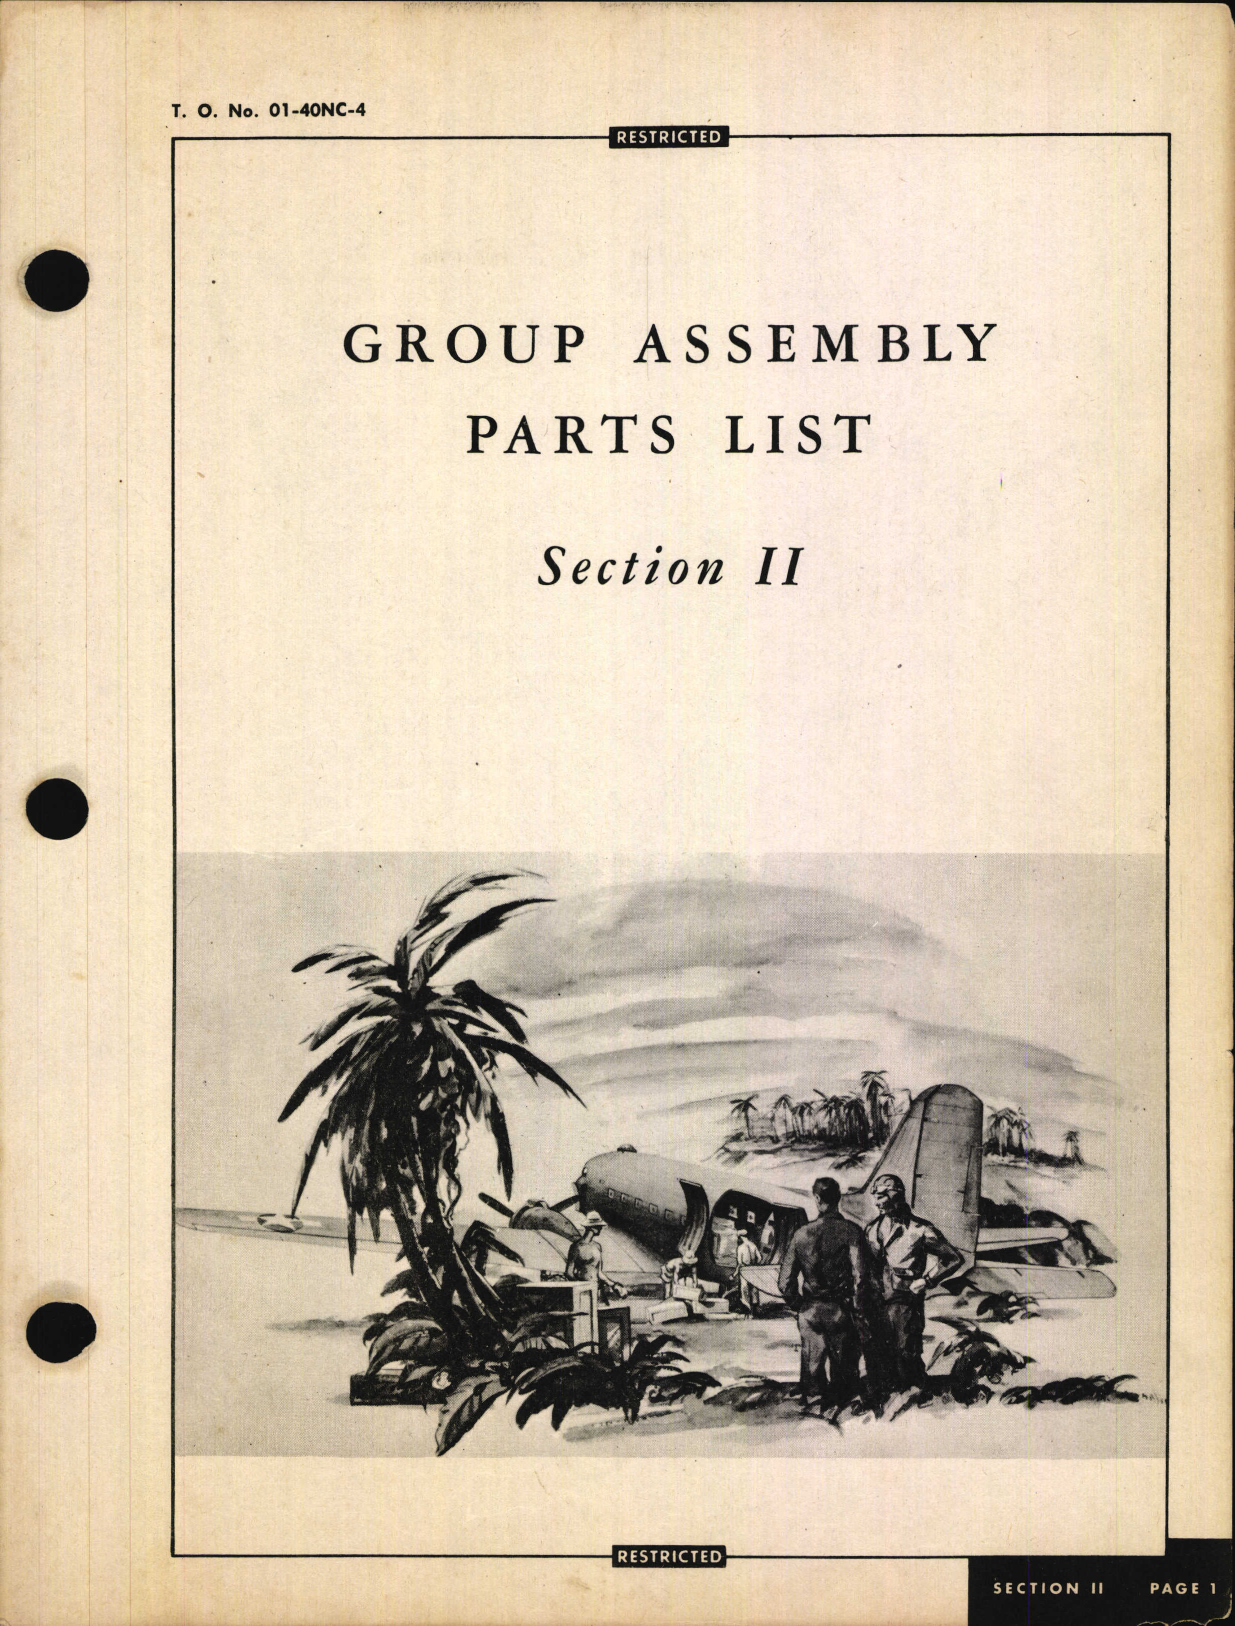 Sample page 5 from AirCorps Library document: Parts Catalog for C-47, R4D-1, and Dakota I